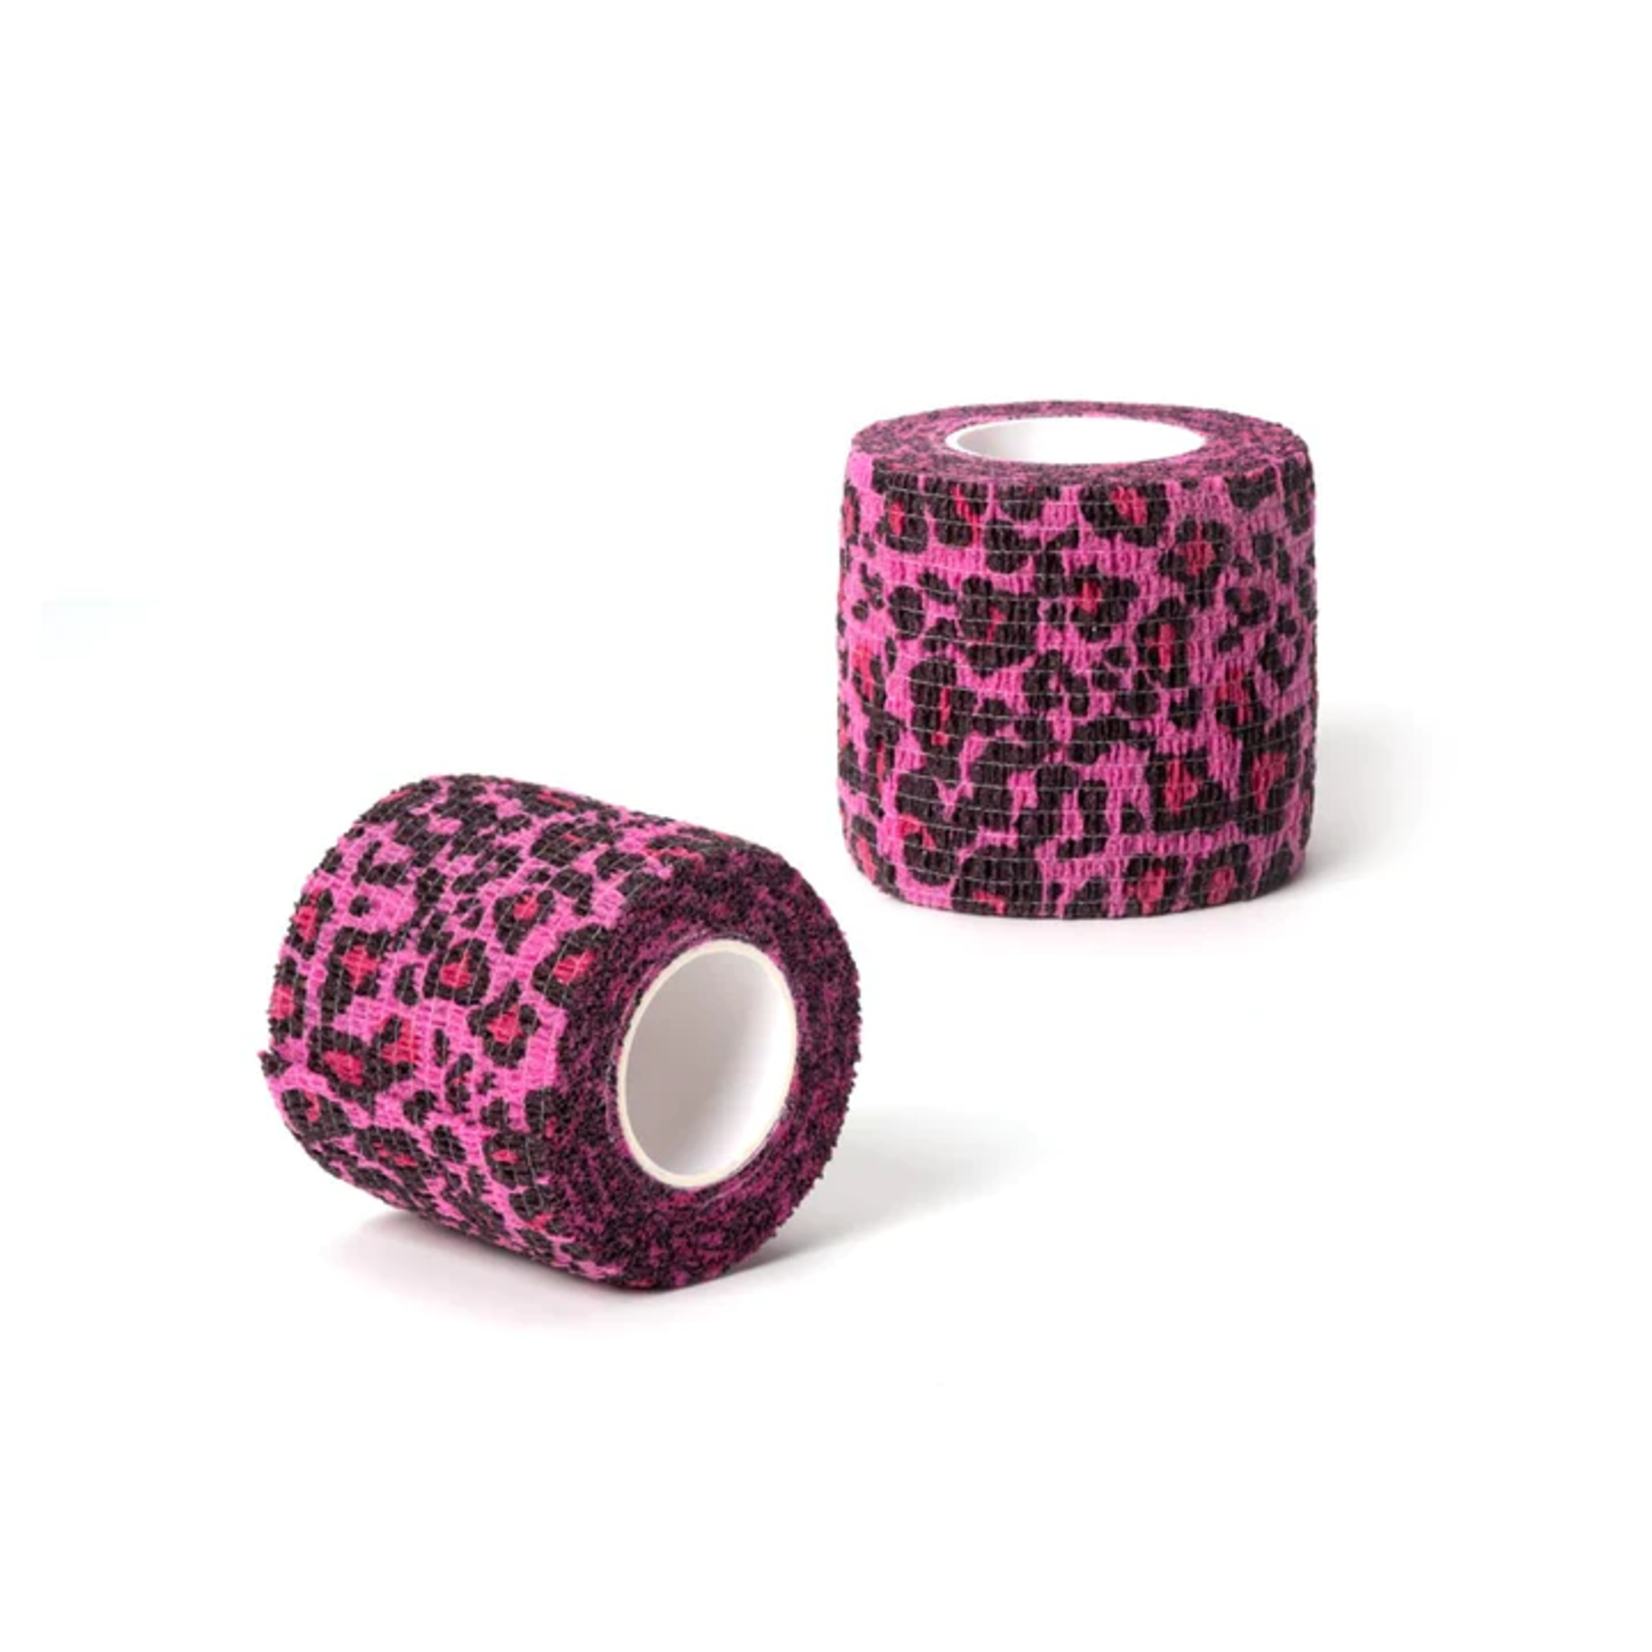 SAFERLY COHESIVE BANDAGES - PINK LEOPARD SINGLE ROLL